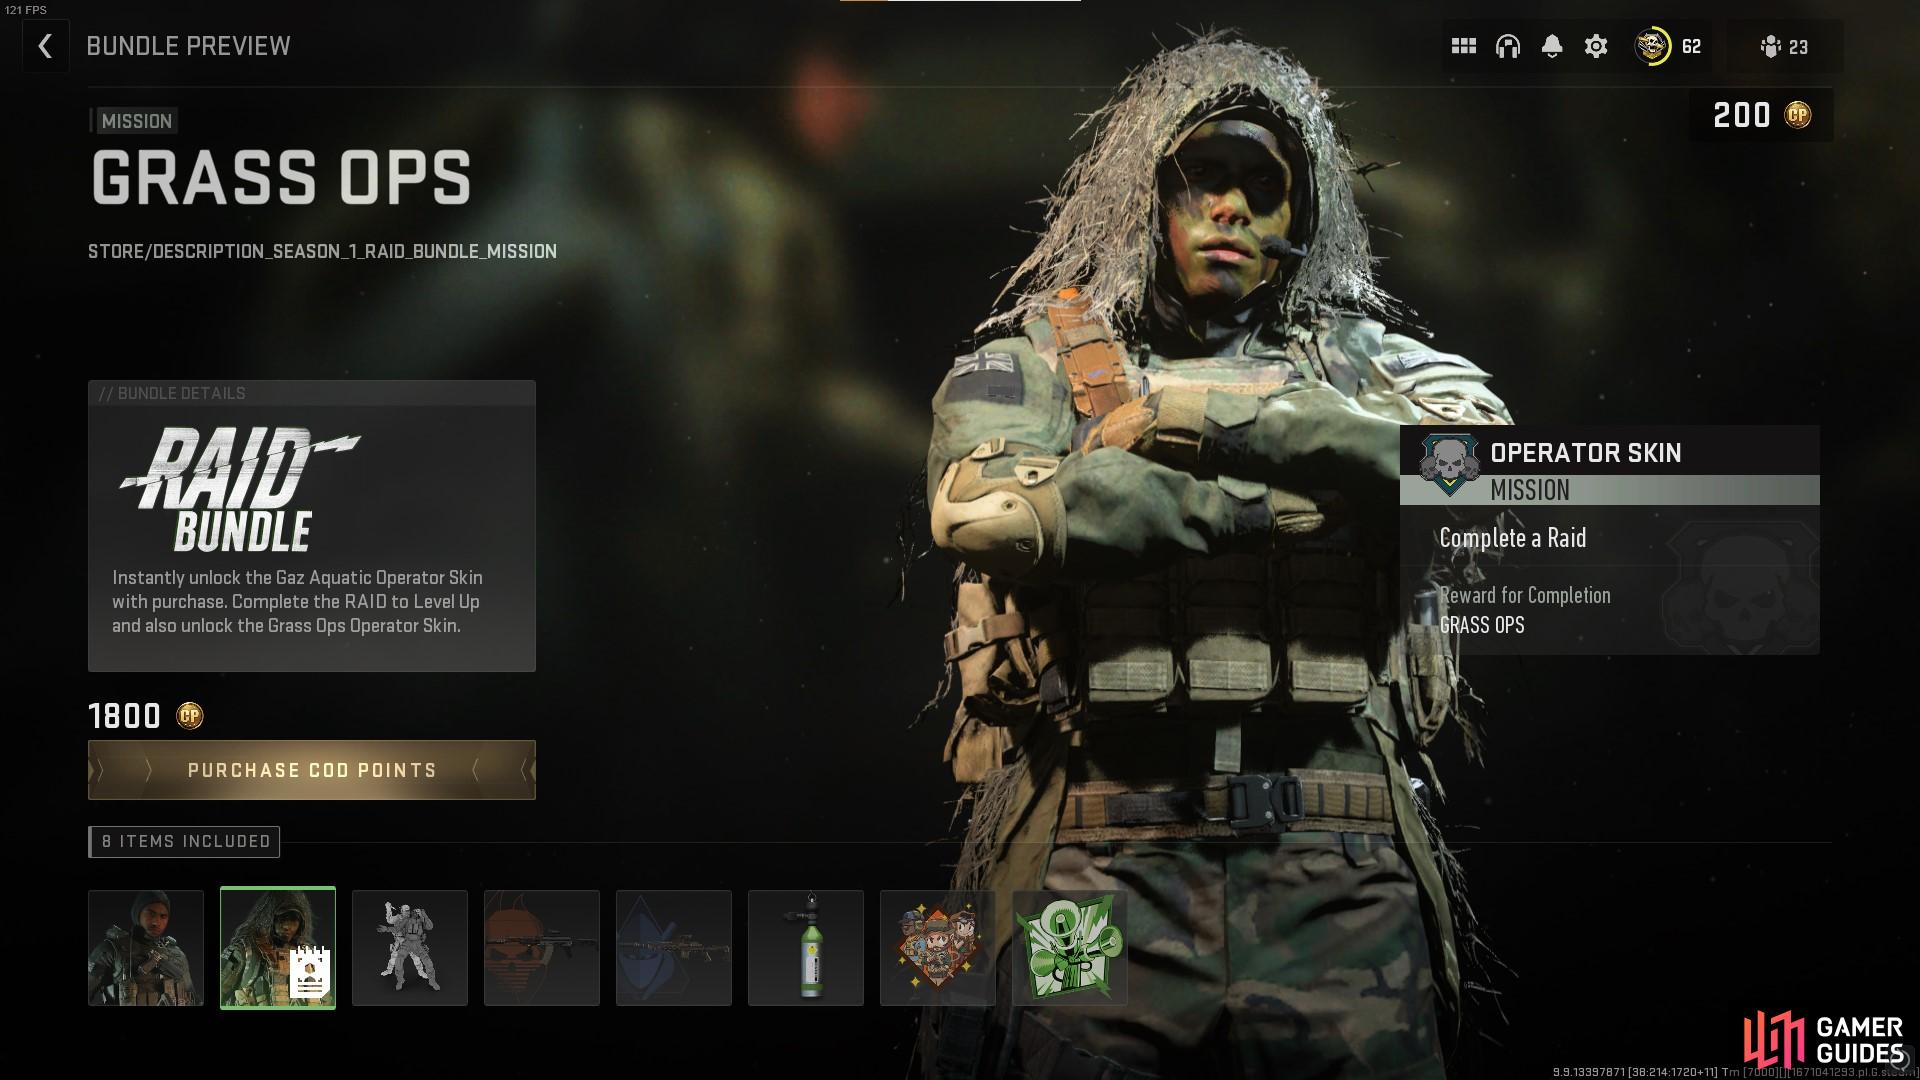 Completing a raid can reward skins and Operators, such as Gaz.